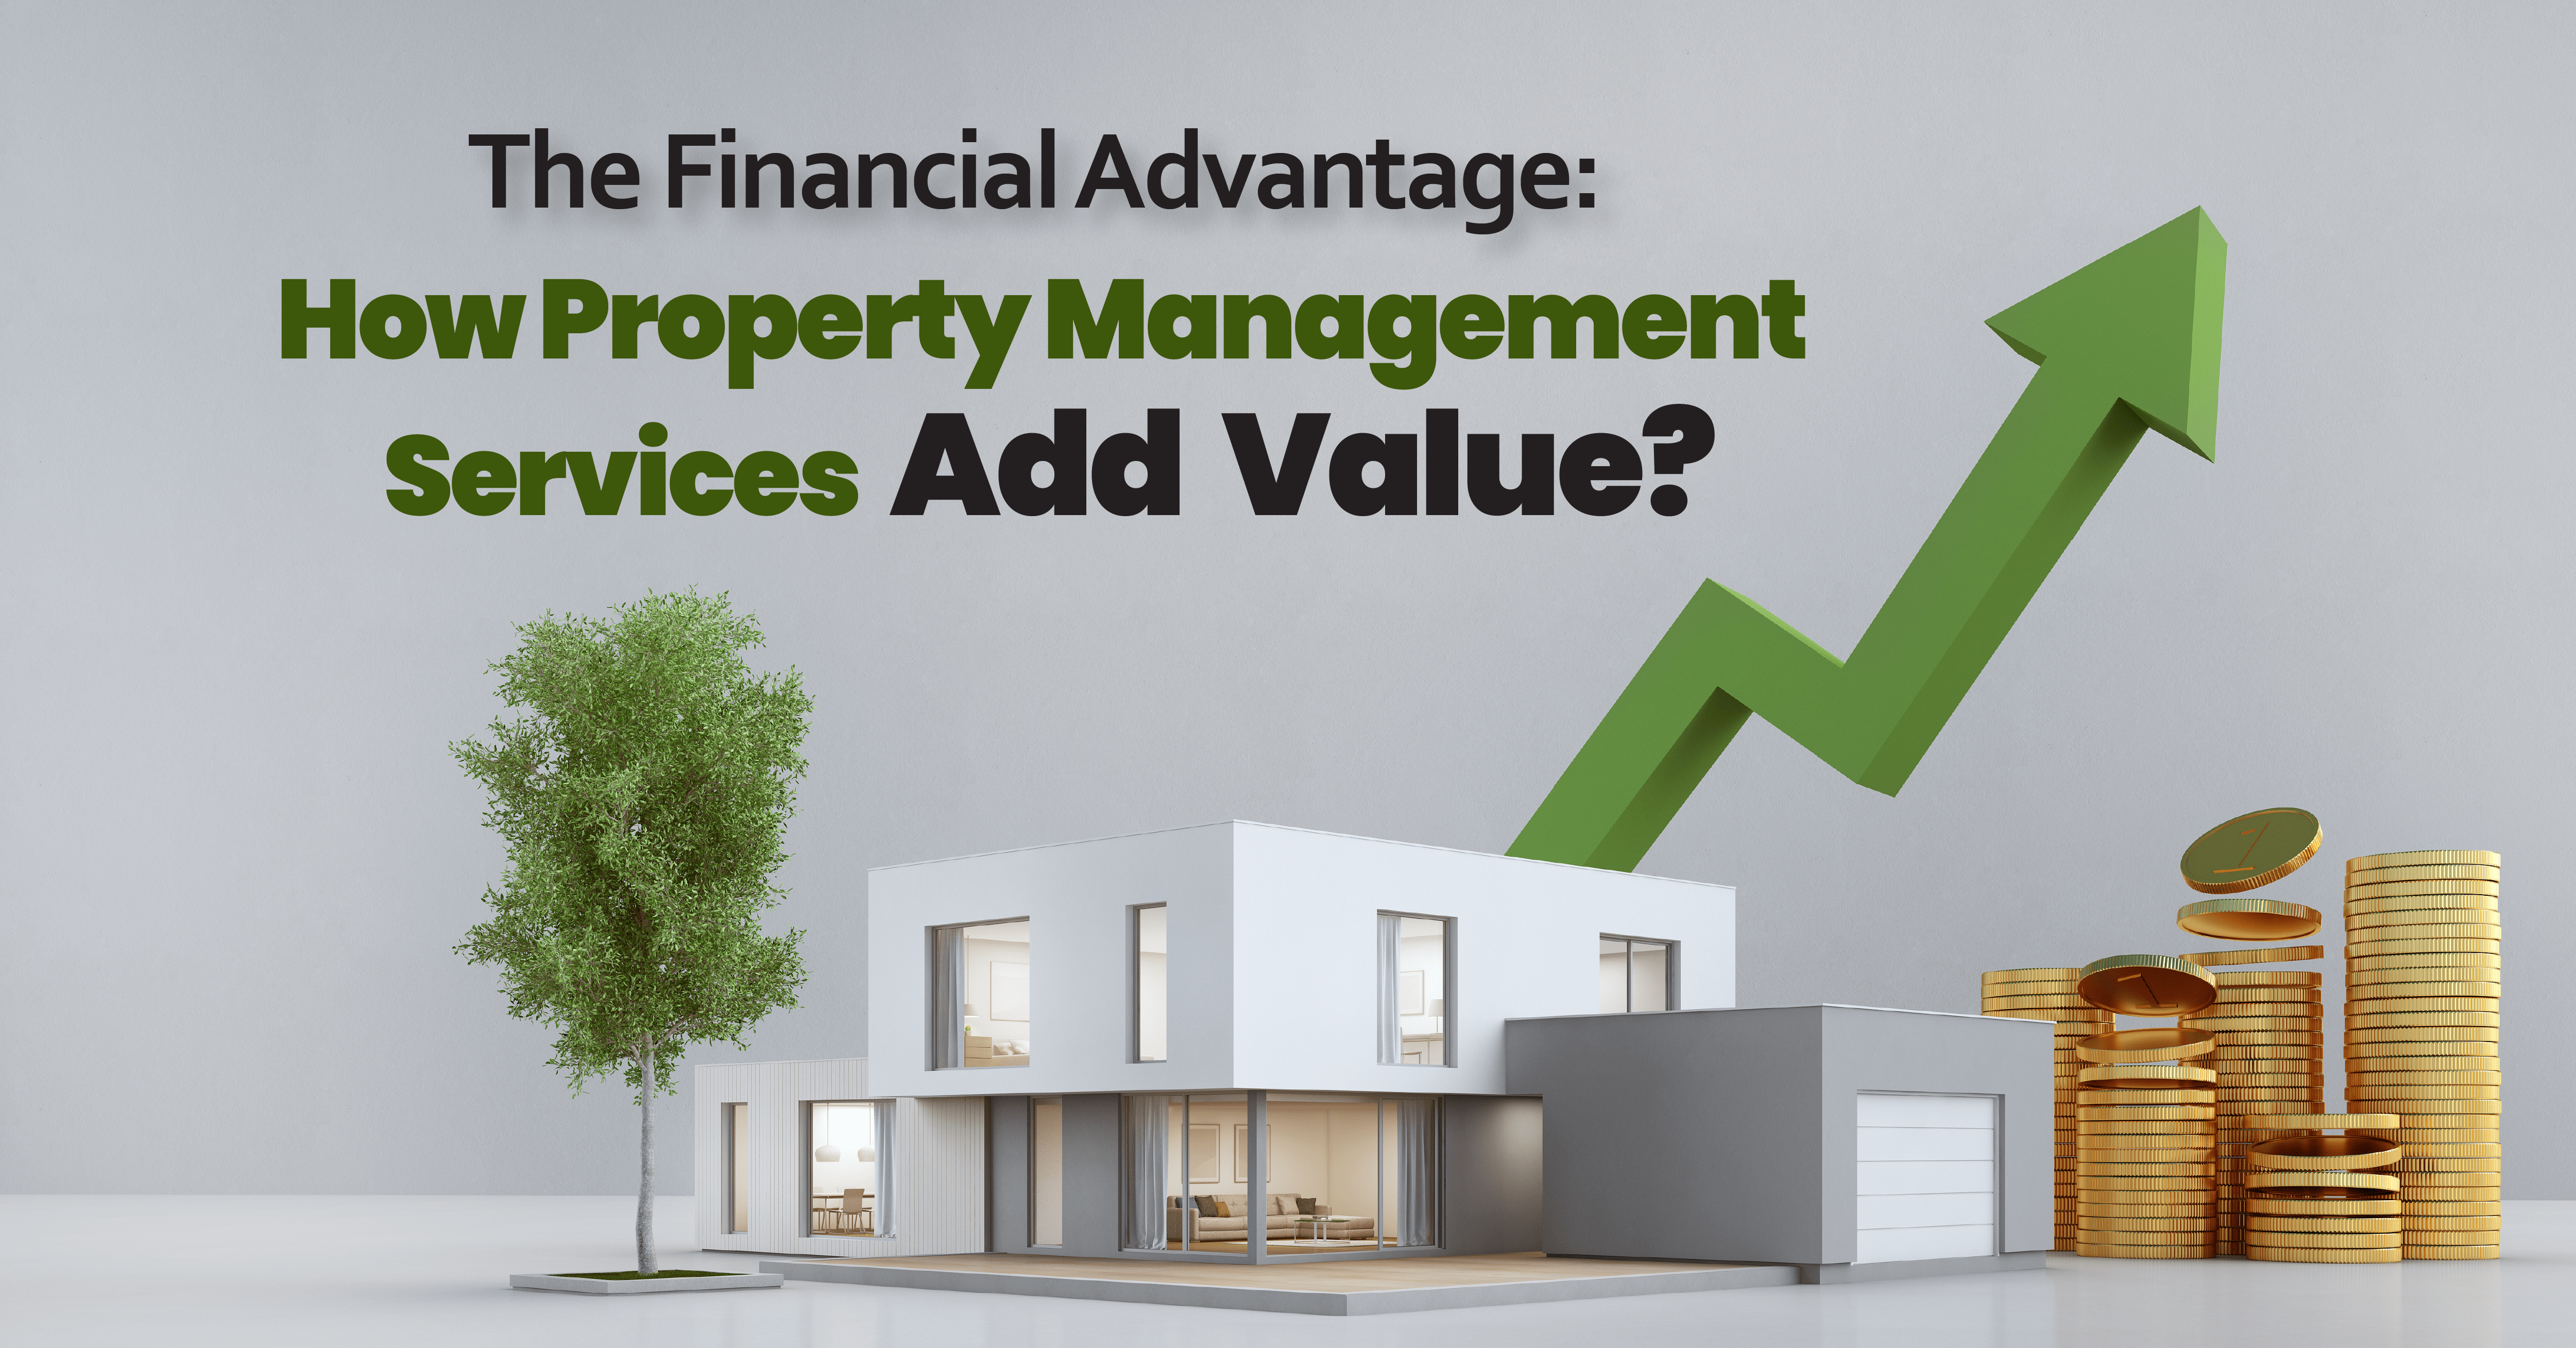 The Financial Advantage: How Property Management Services Add Value